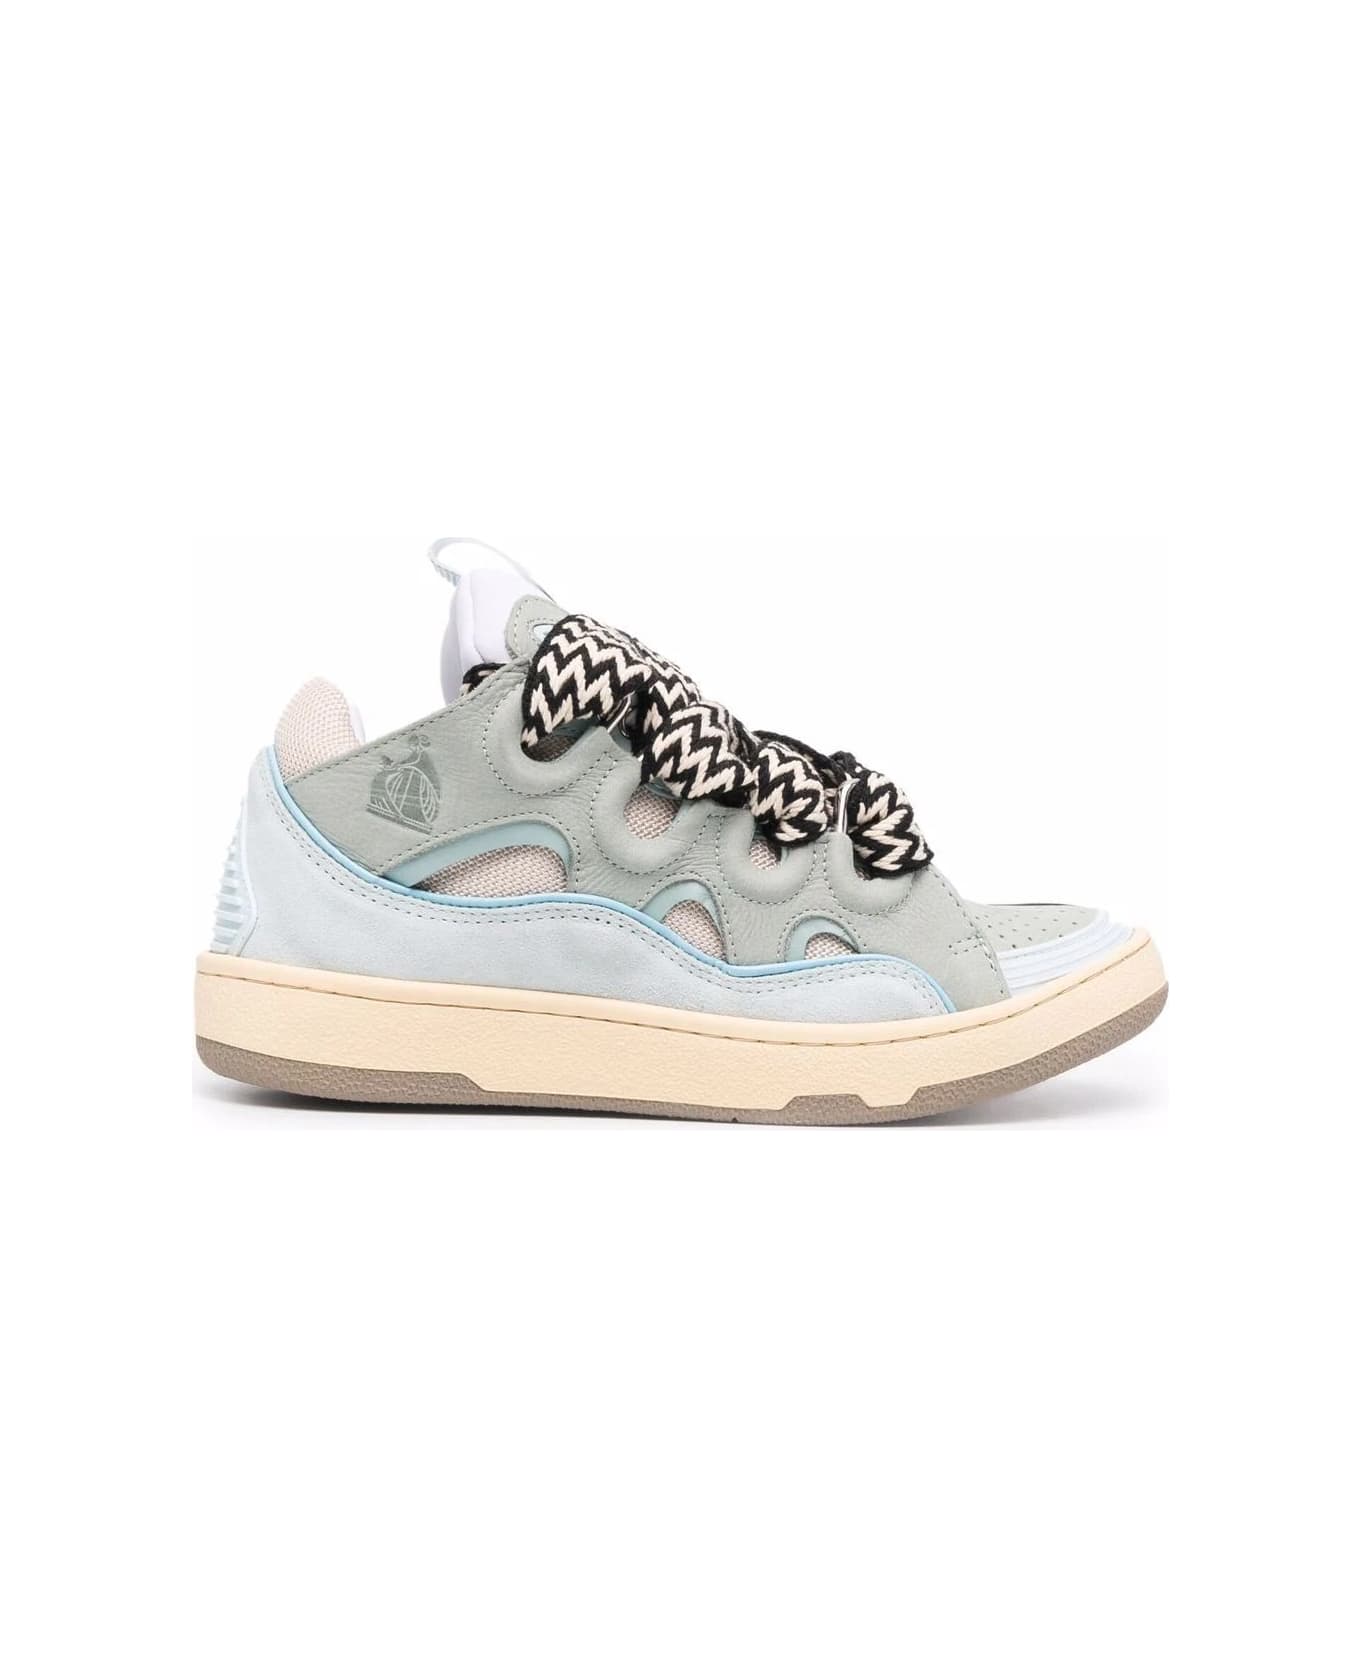 Lanvin Curb Sneakers In Light Blue Leather - Blue スニーカー